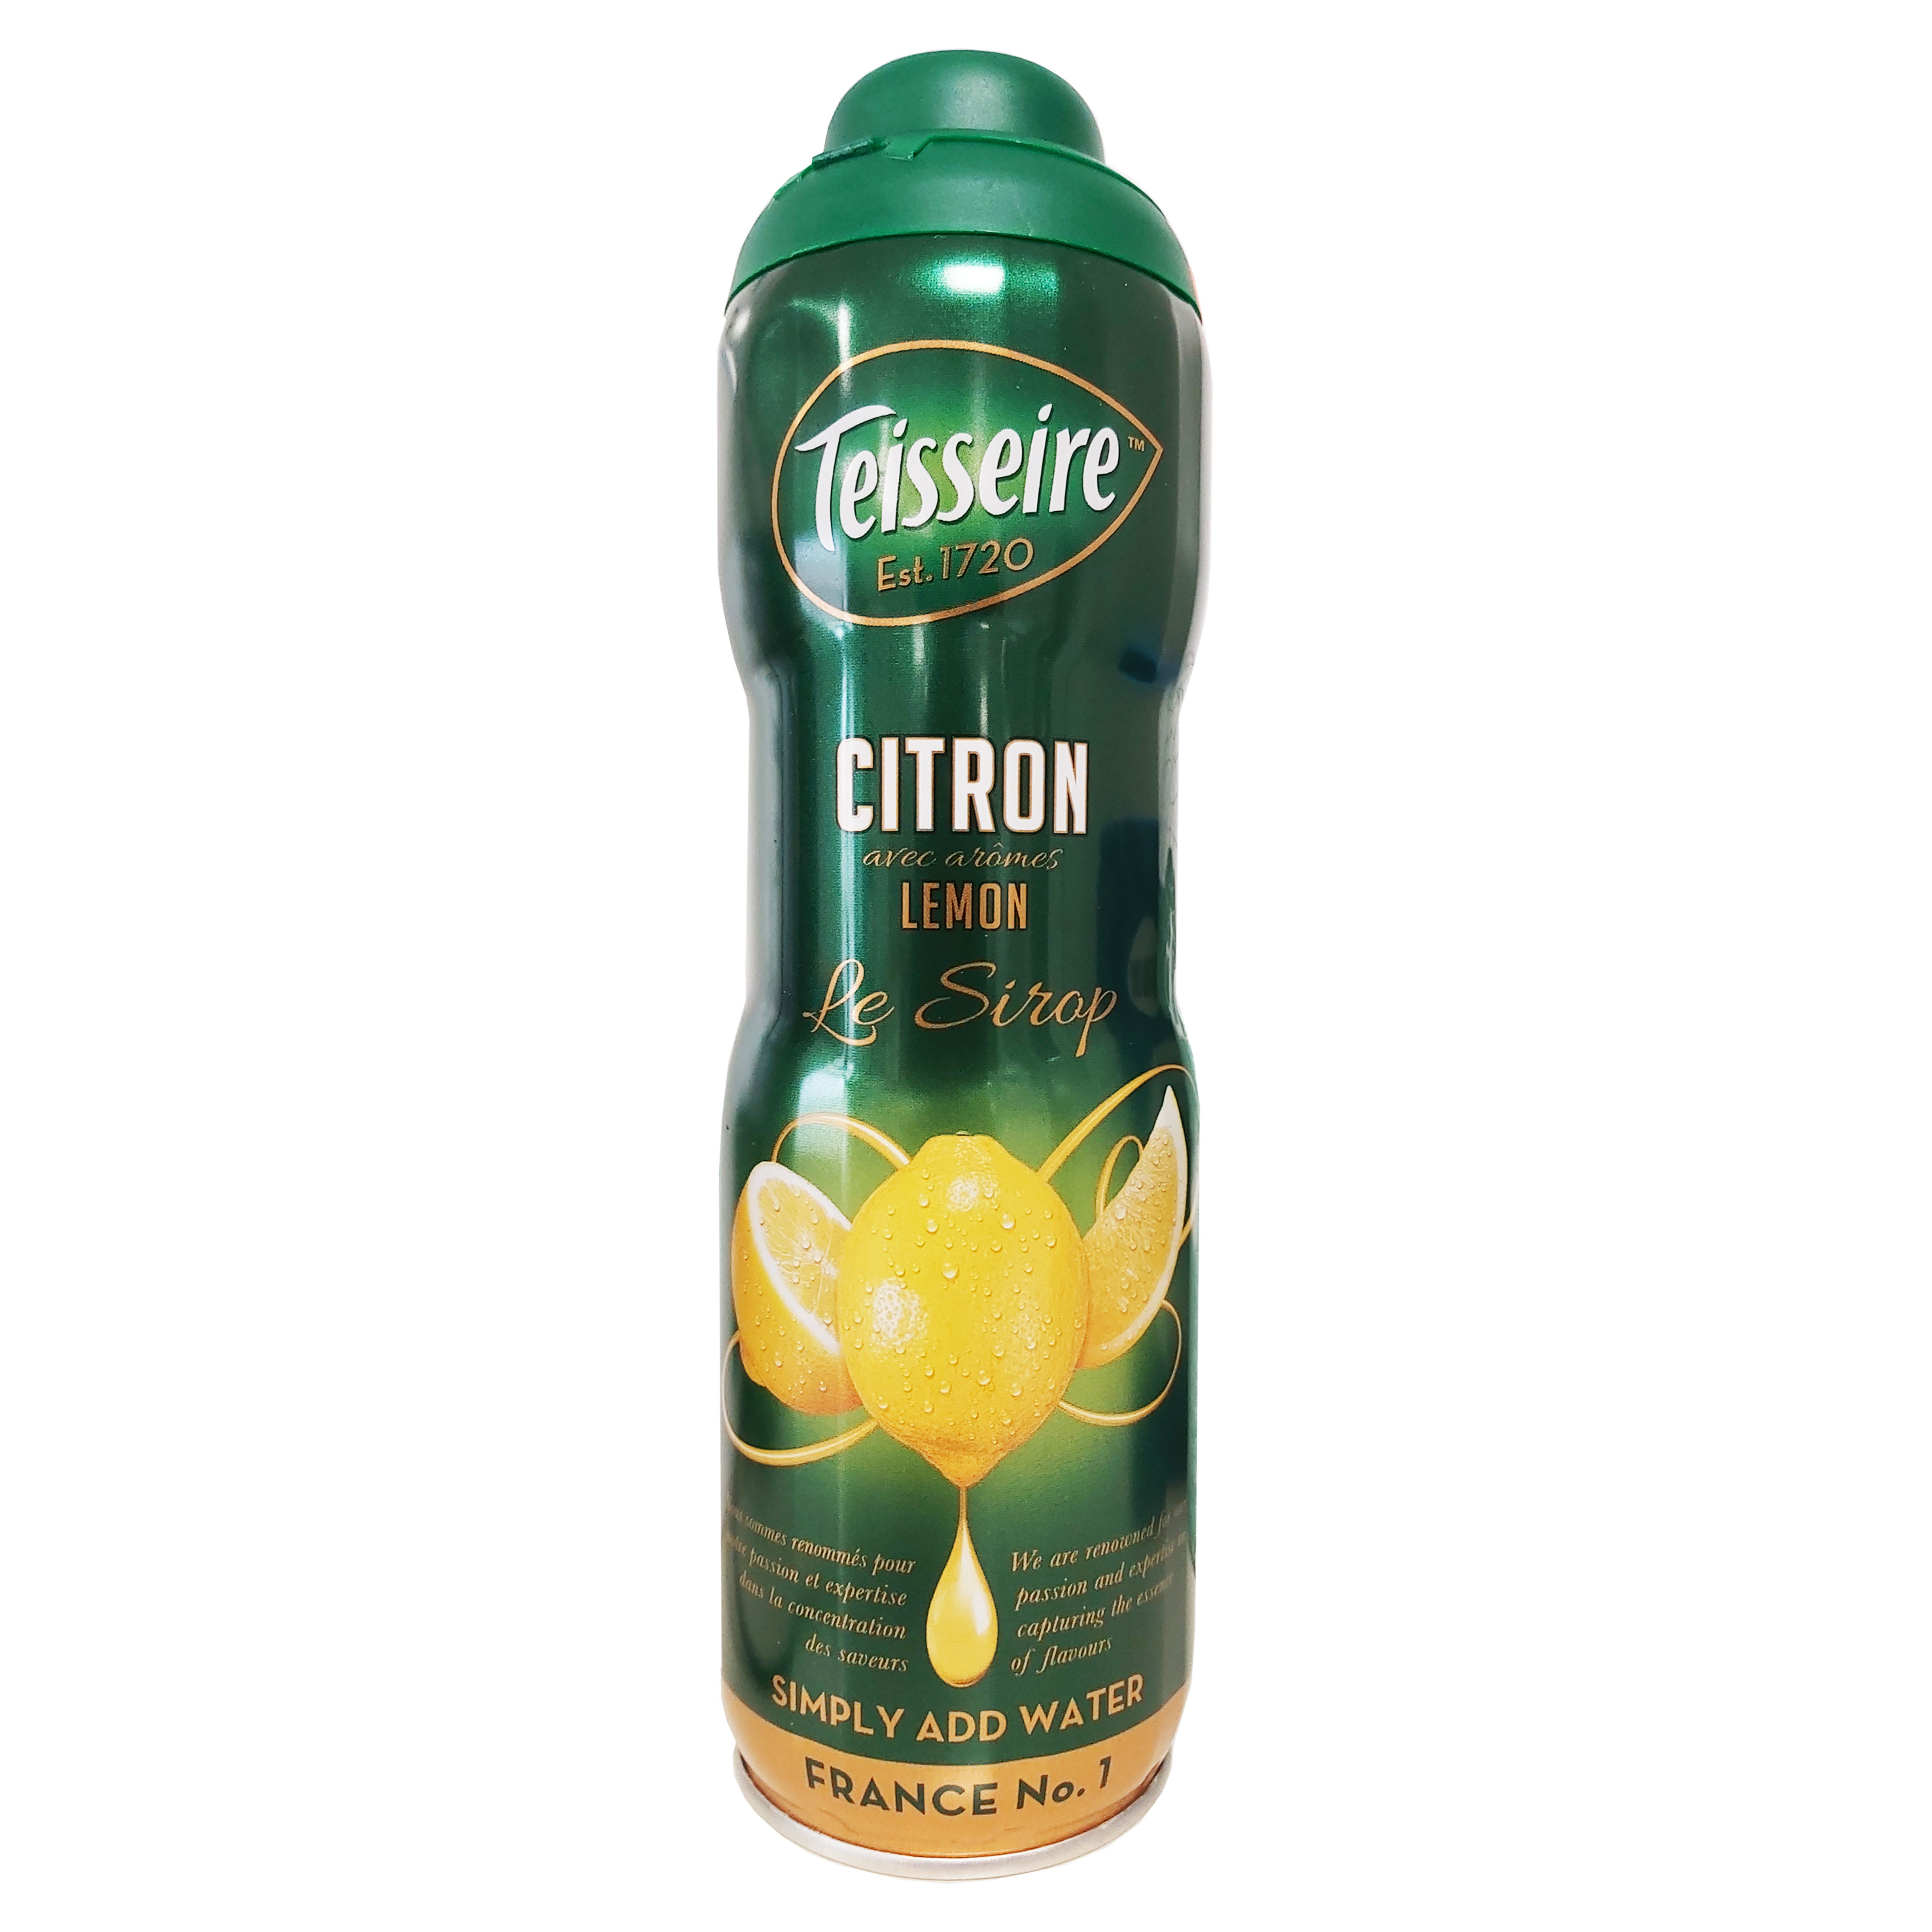 Teisseire sirop limon 60 cl.